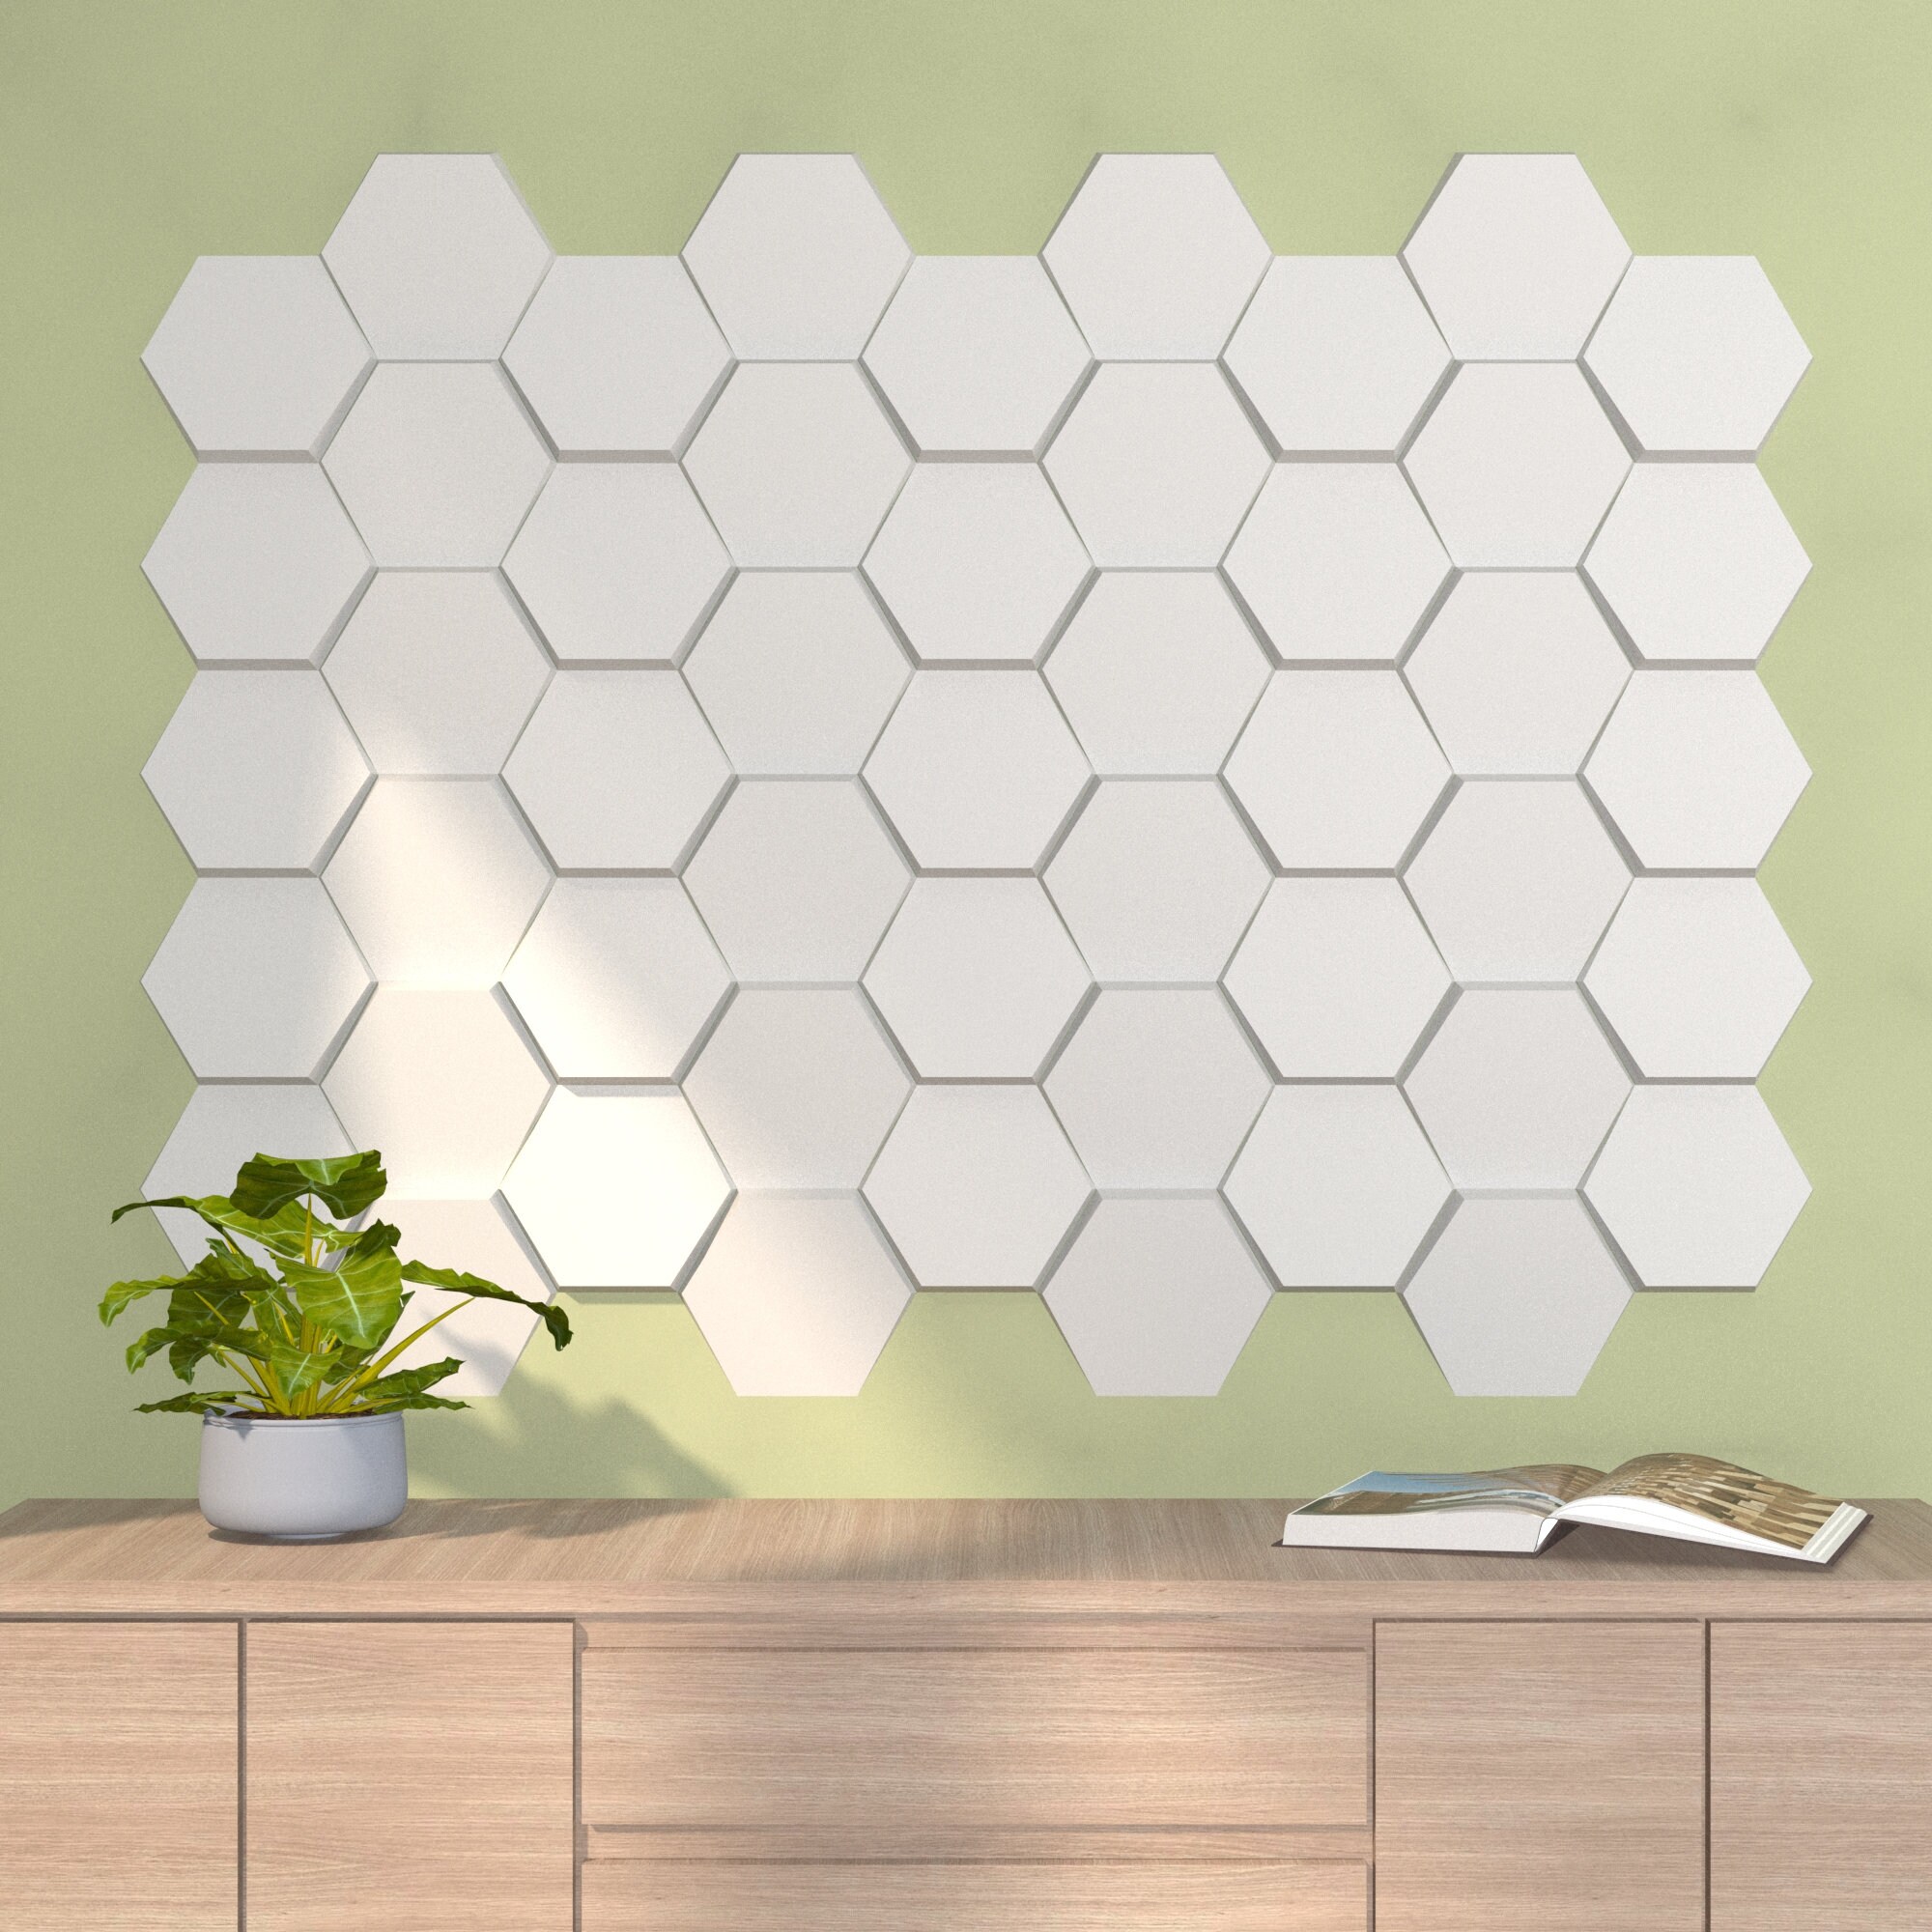 Hexagon Wall Paneling Ideas, Honeycomb Decor, Accent Wall Decoration,  Kitchen Wall Decor, Custom Design Wall Paneling, Do It Yourself 